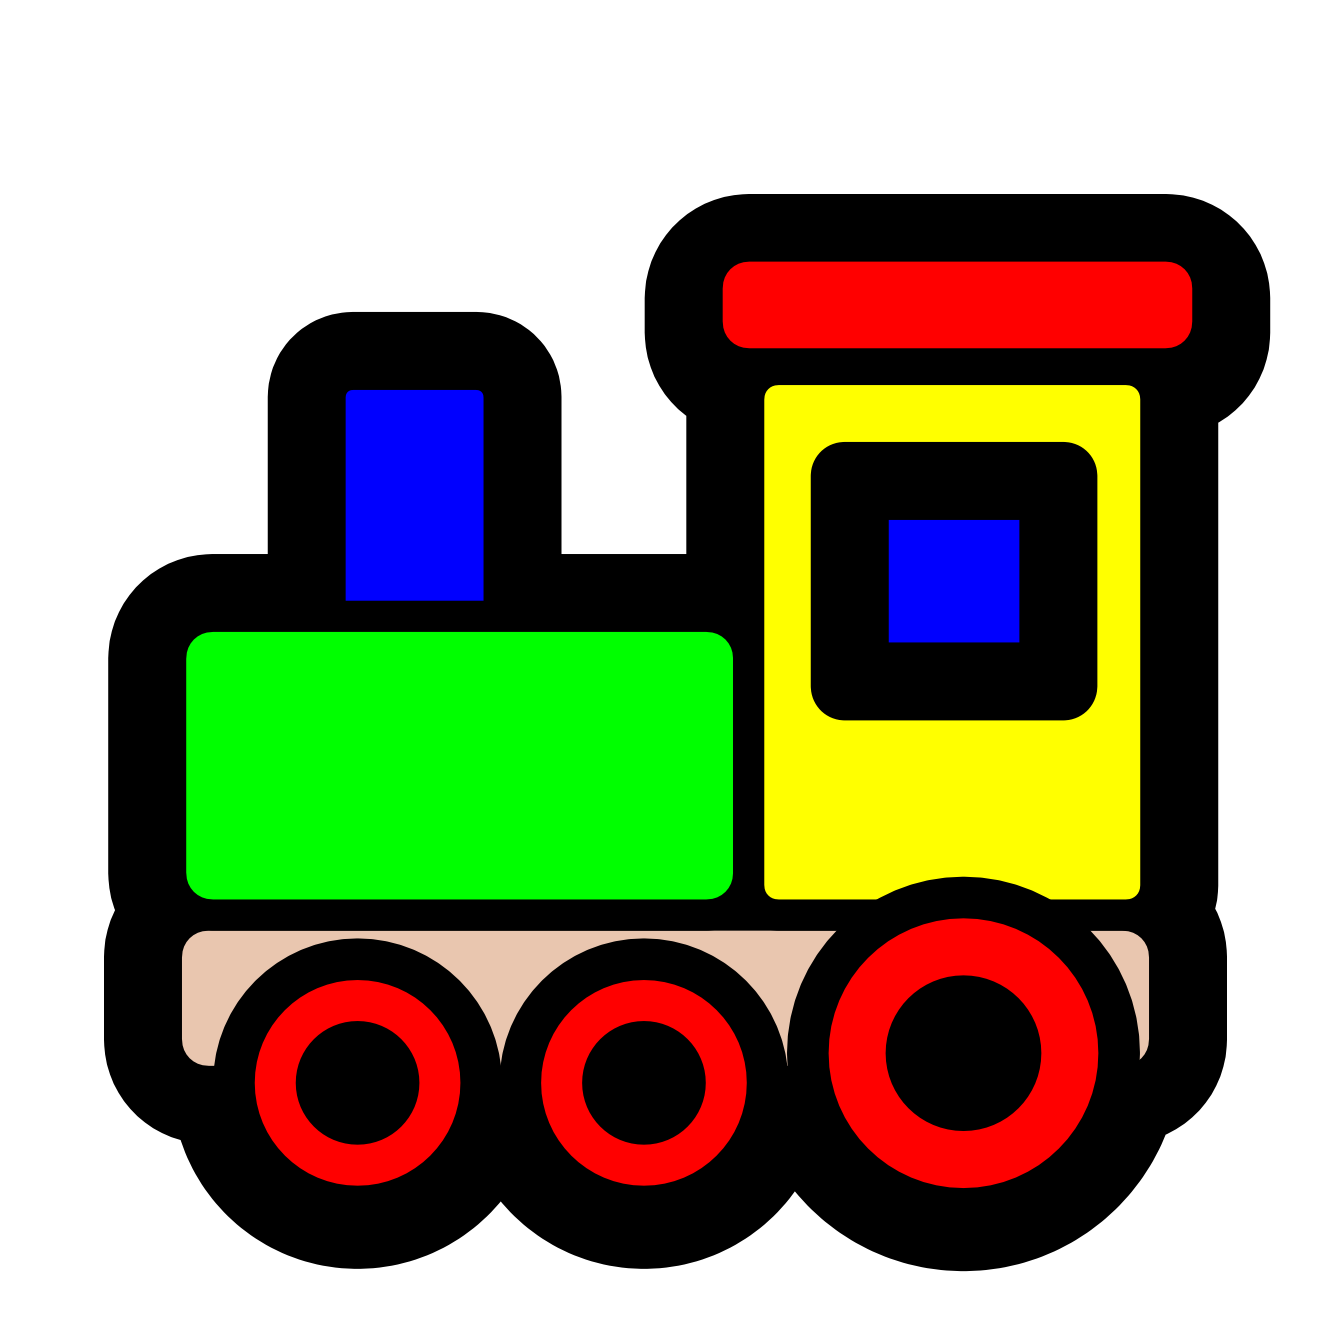 Moving clipart train. Toy trains image group